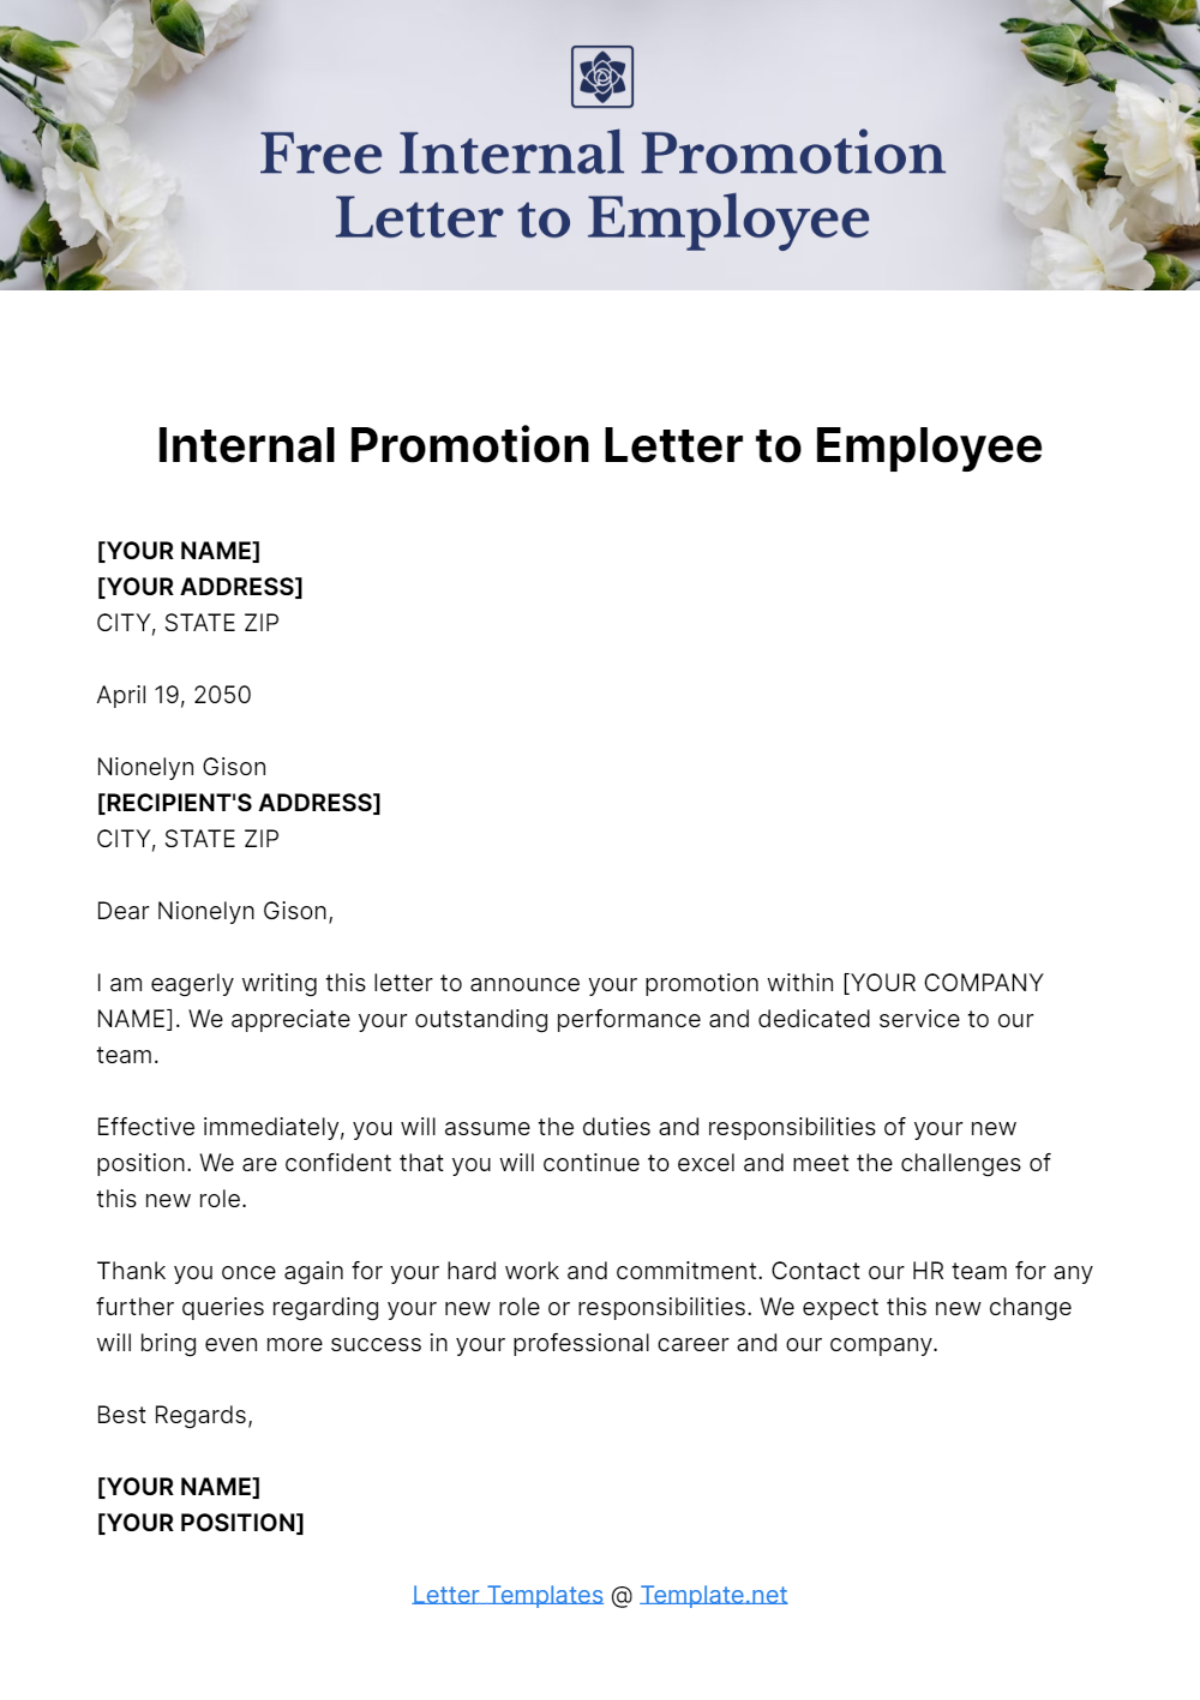 Internal Promotion Letter to Employee Template